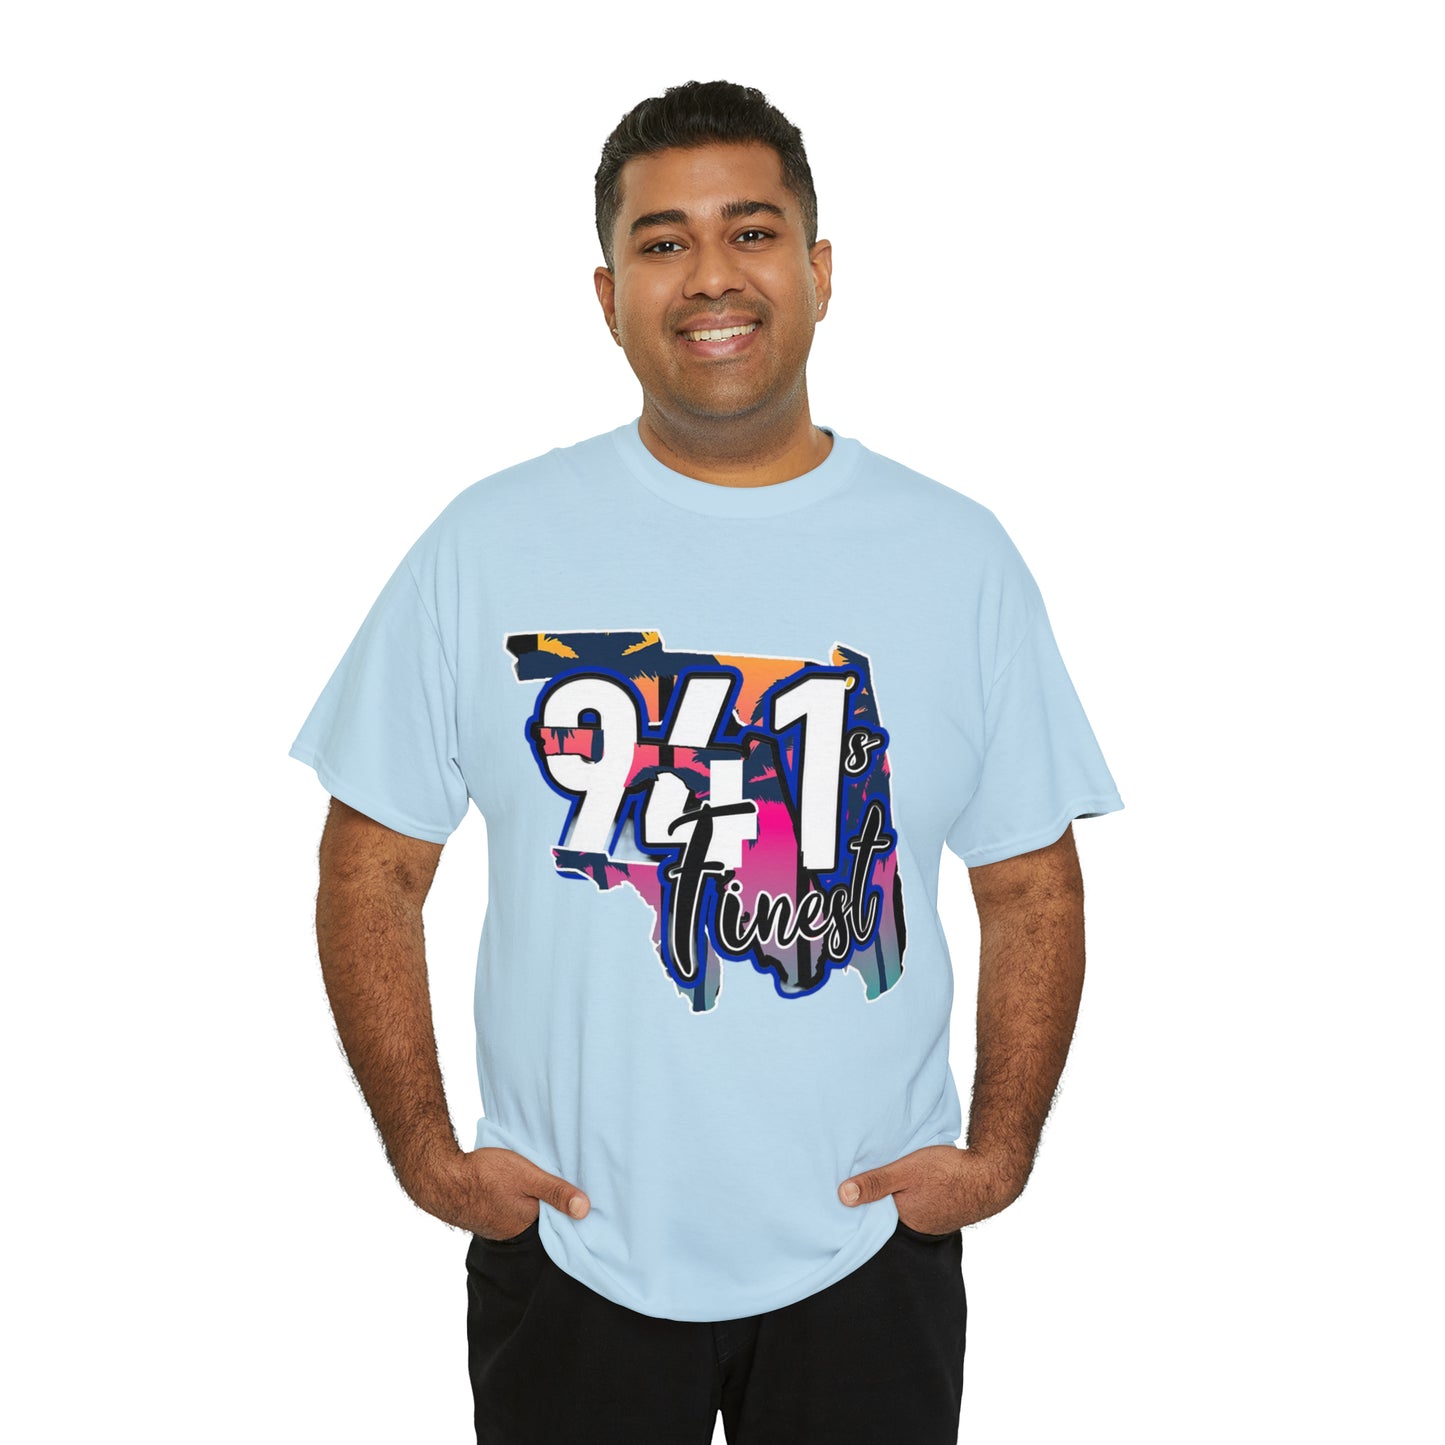 941’s Finest T-shirt (Palm Trees)